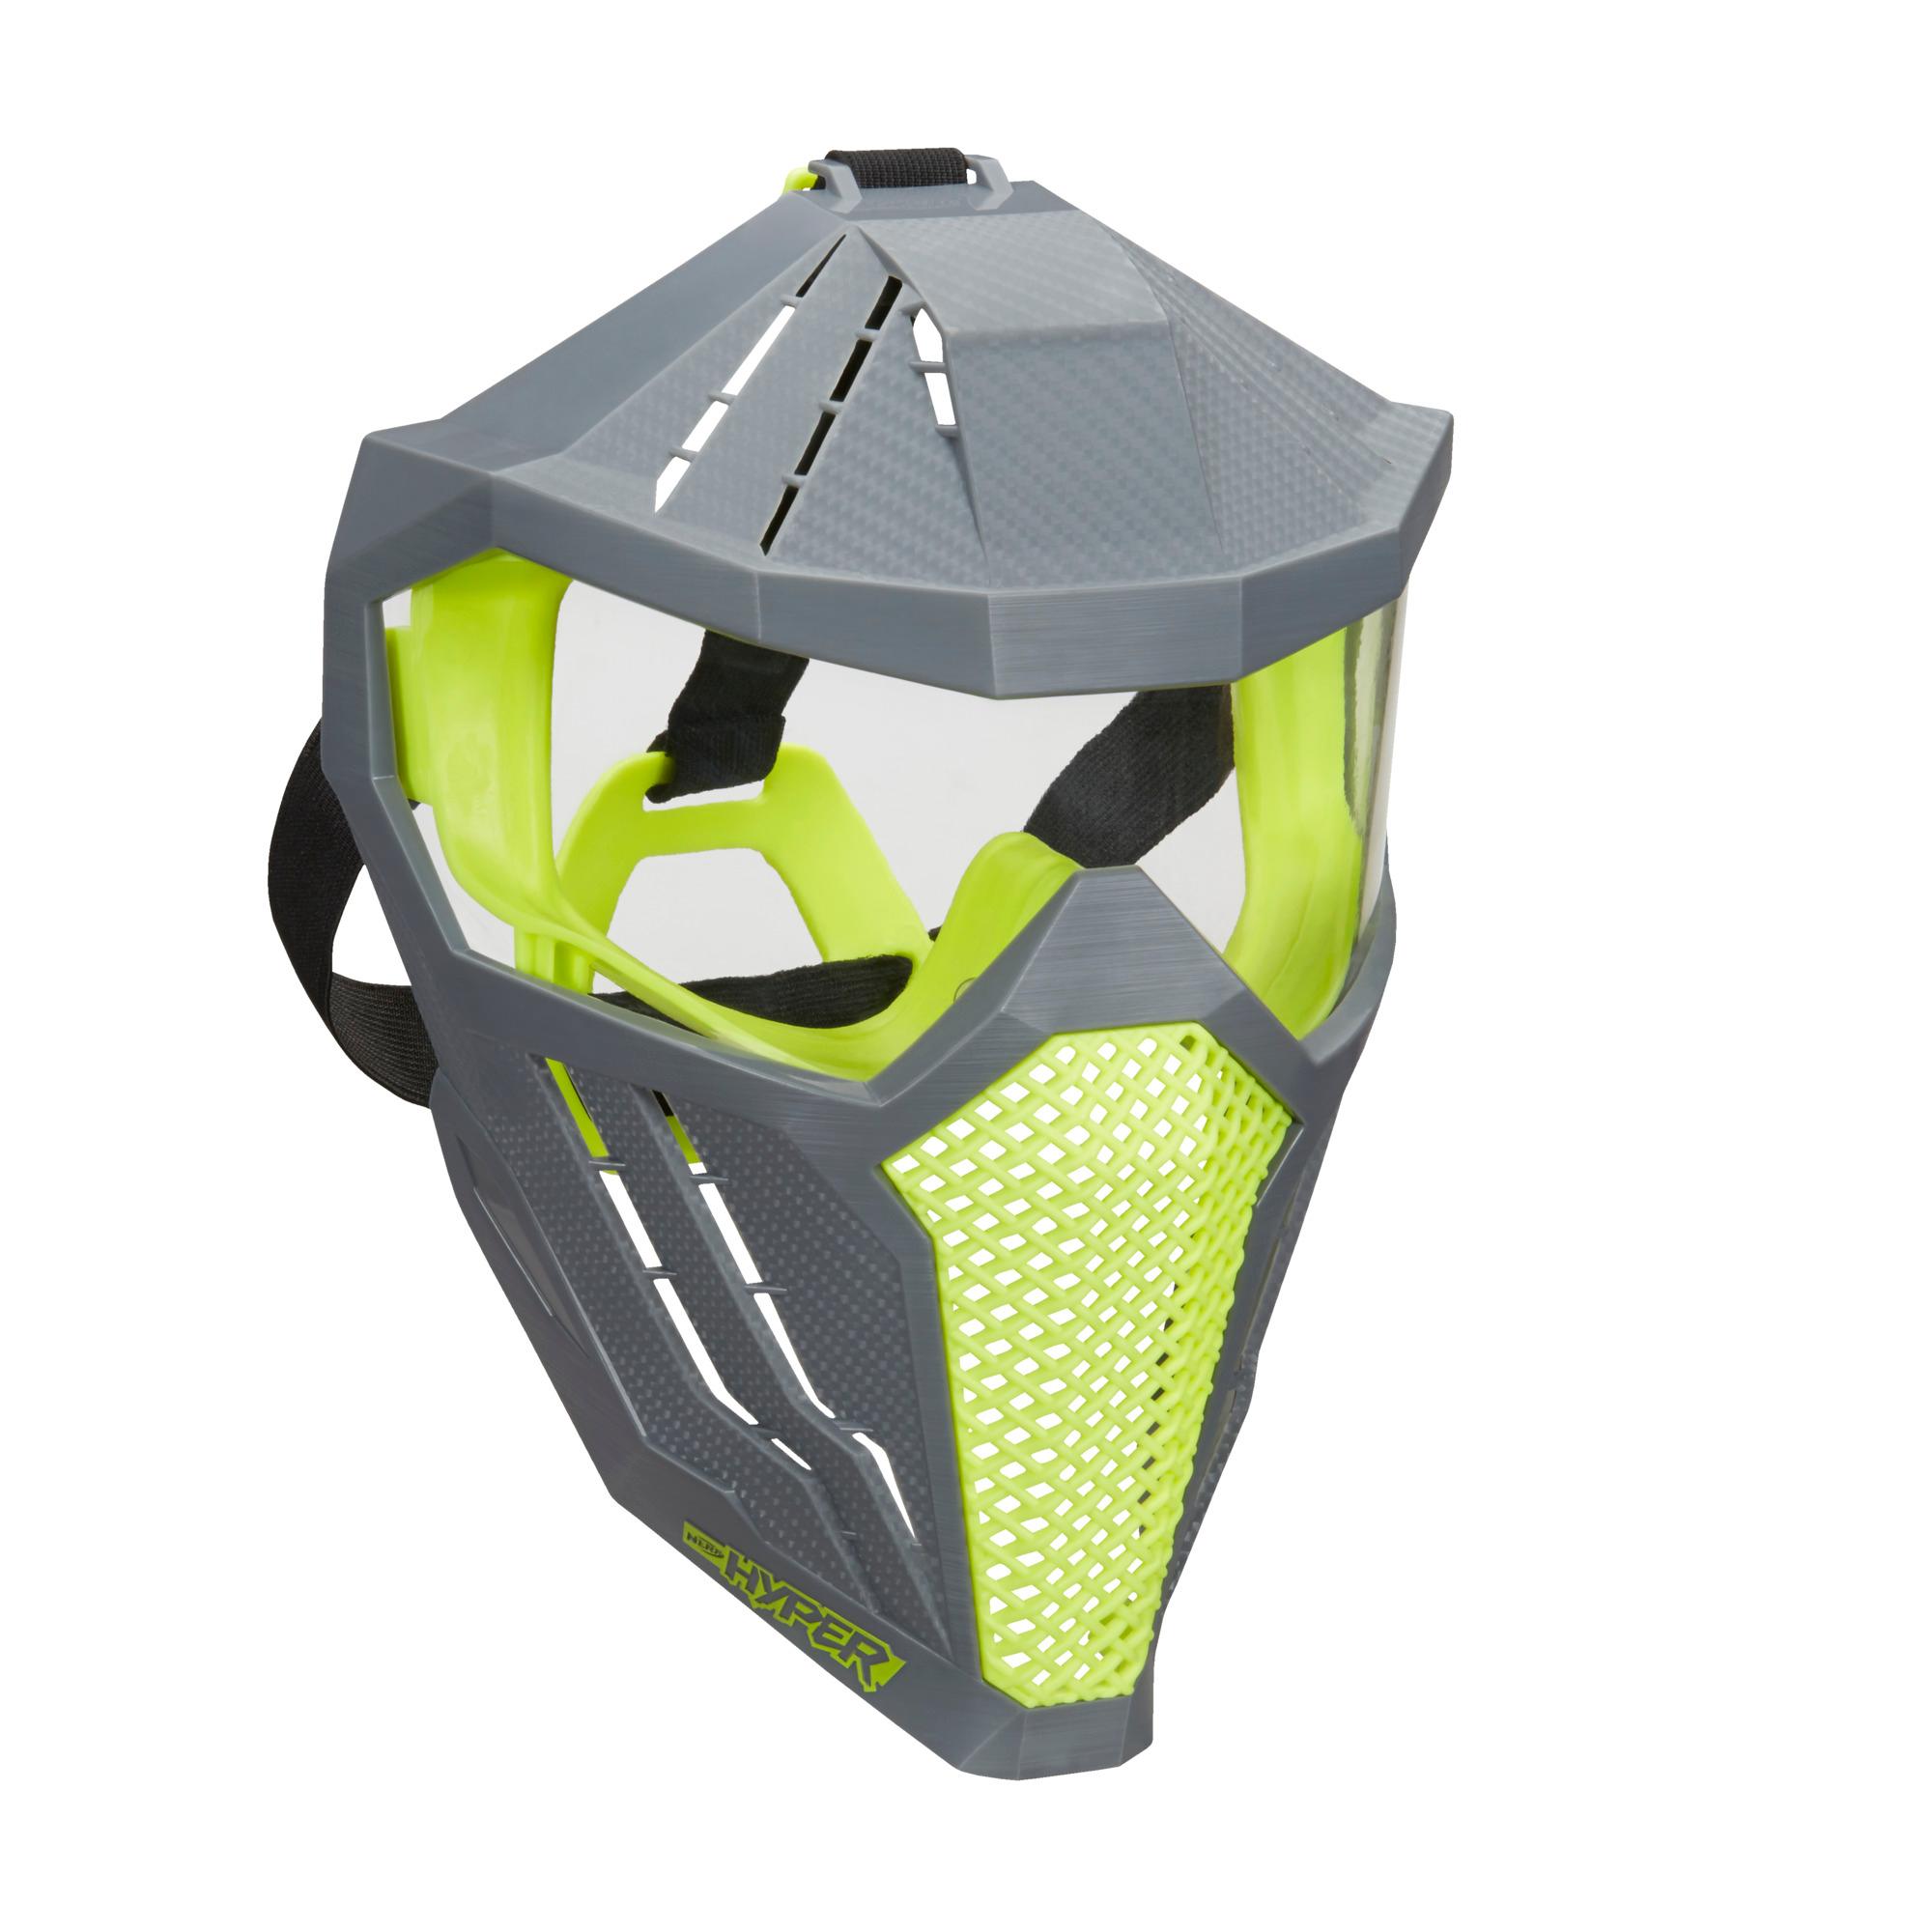 Nerf Hyper Face Mask -- Breathable Design, Adjustable Head Strap, Green Team Color -- For Teens, Adults